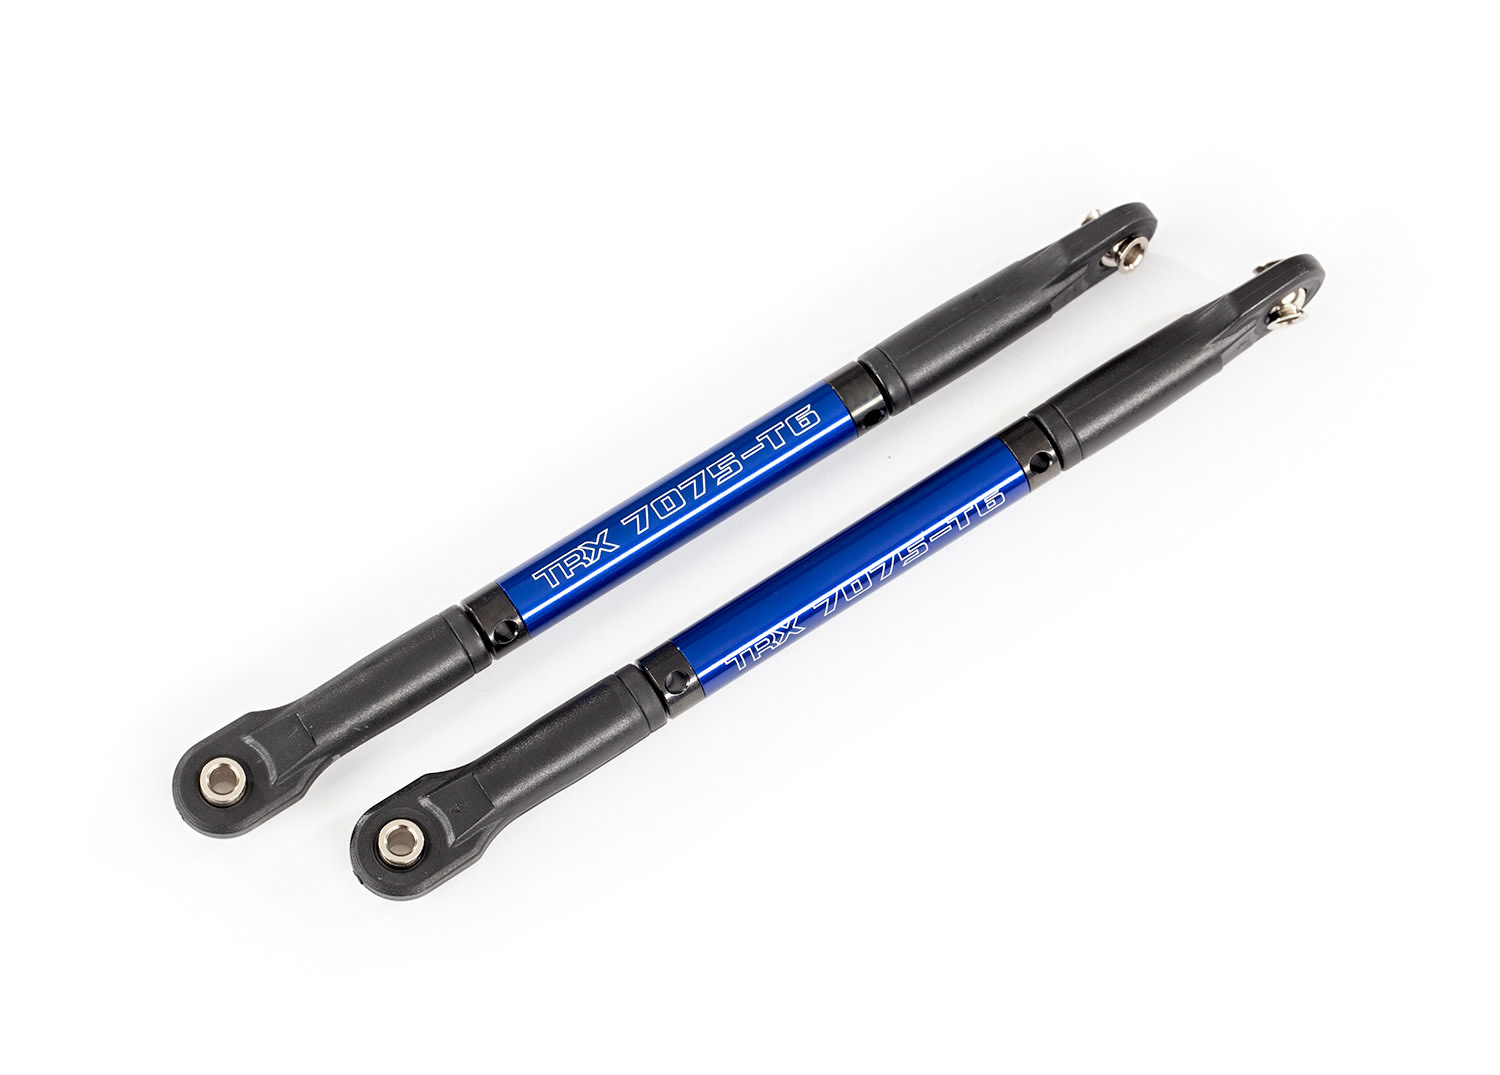 Traxxas 8619X - Push rods, aluminum (blue-anodized), heavy duty (2) (assembled with rod ends and threaded inserts)